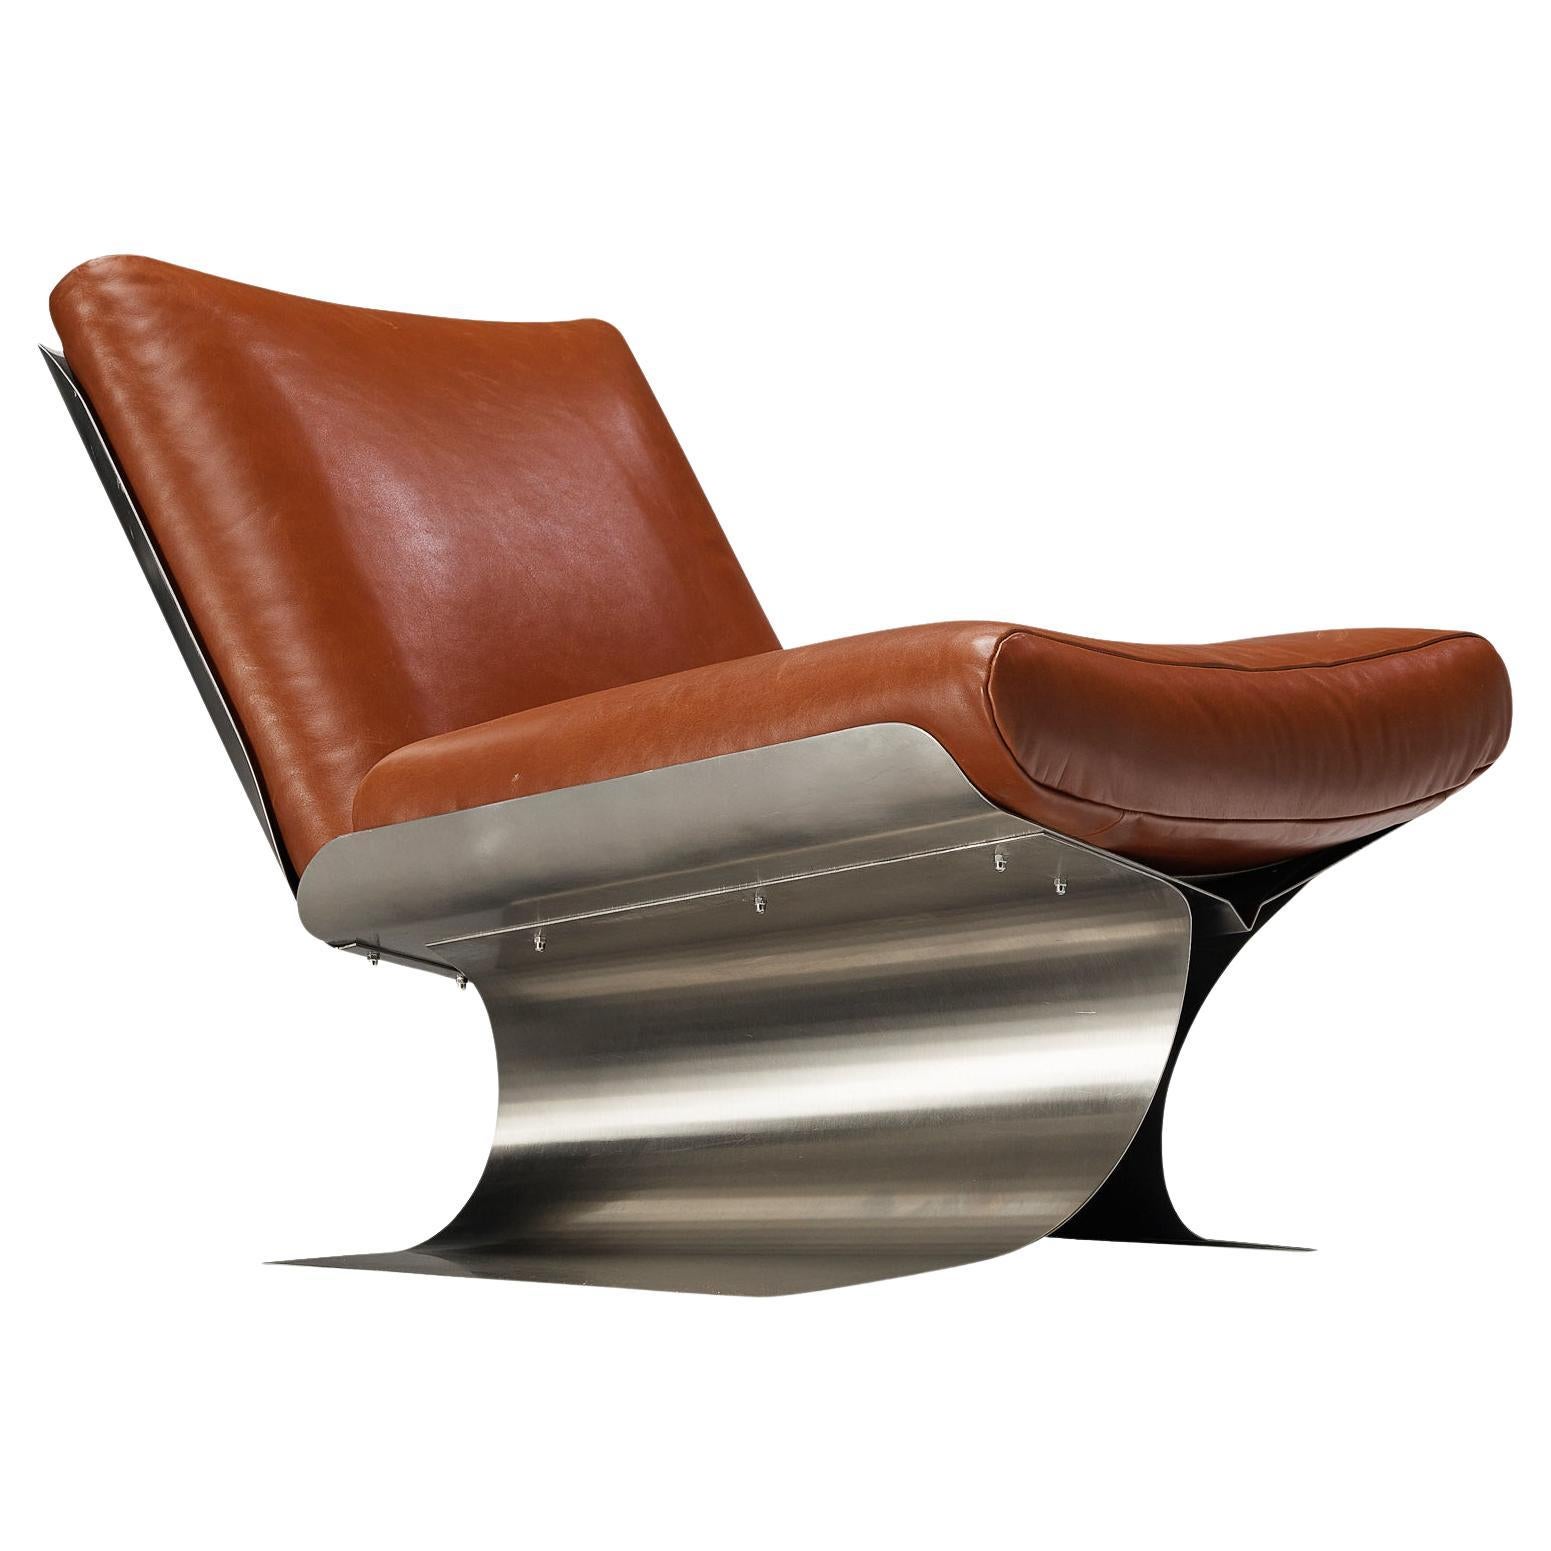 Rare Xavier Féal Lounge Chair in Brushed Steel and Cognac Leather  For Sale